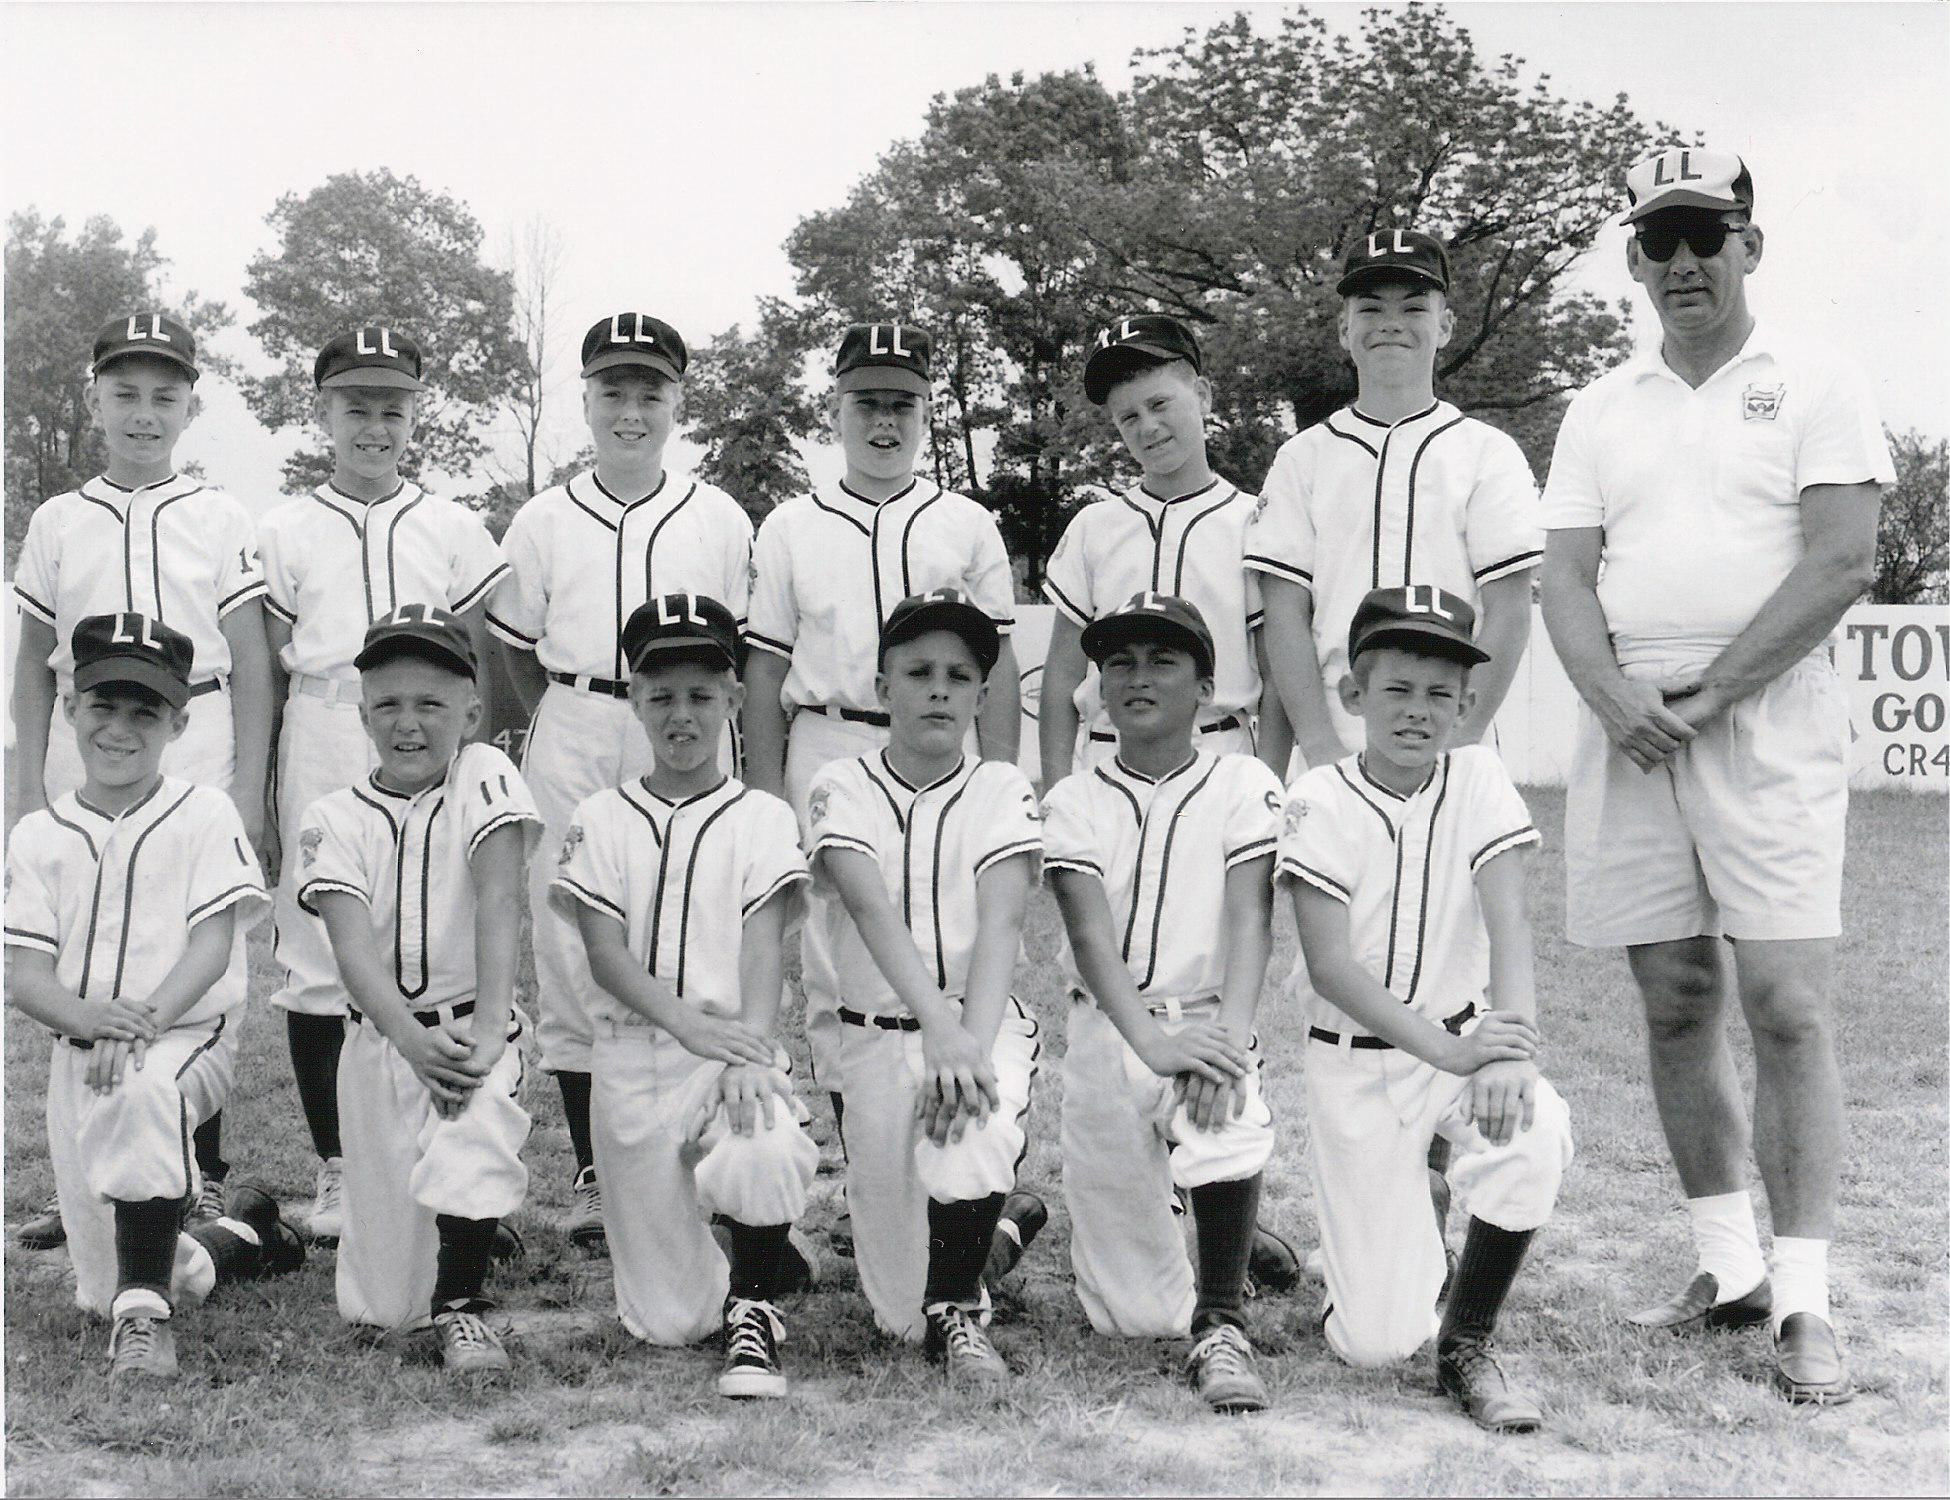 Little League photo submitted by Don Moshos class of '66